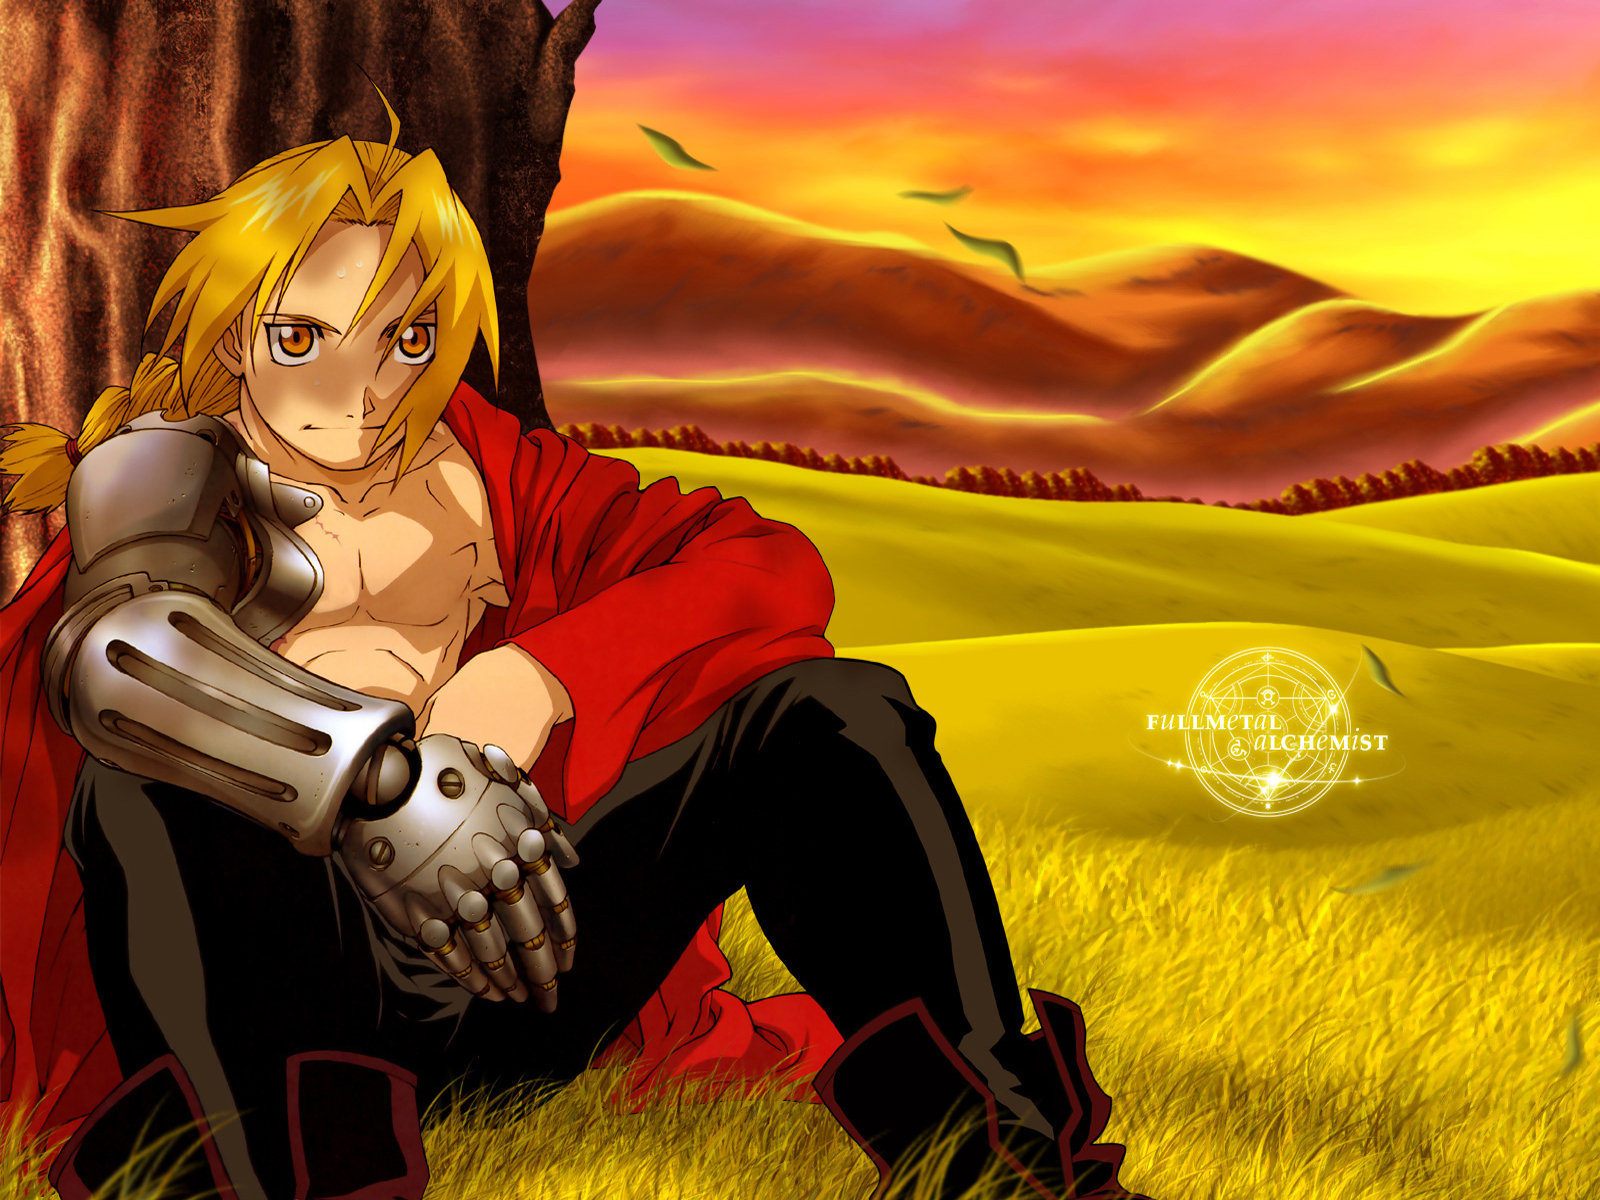 Edward Elric standing in front of a city skyline at sunset